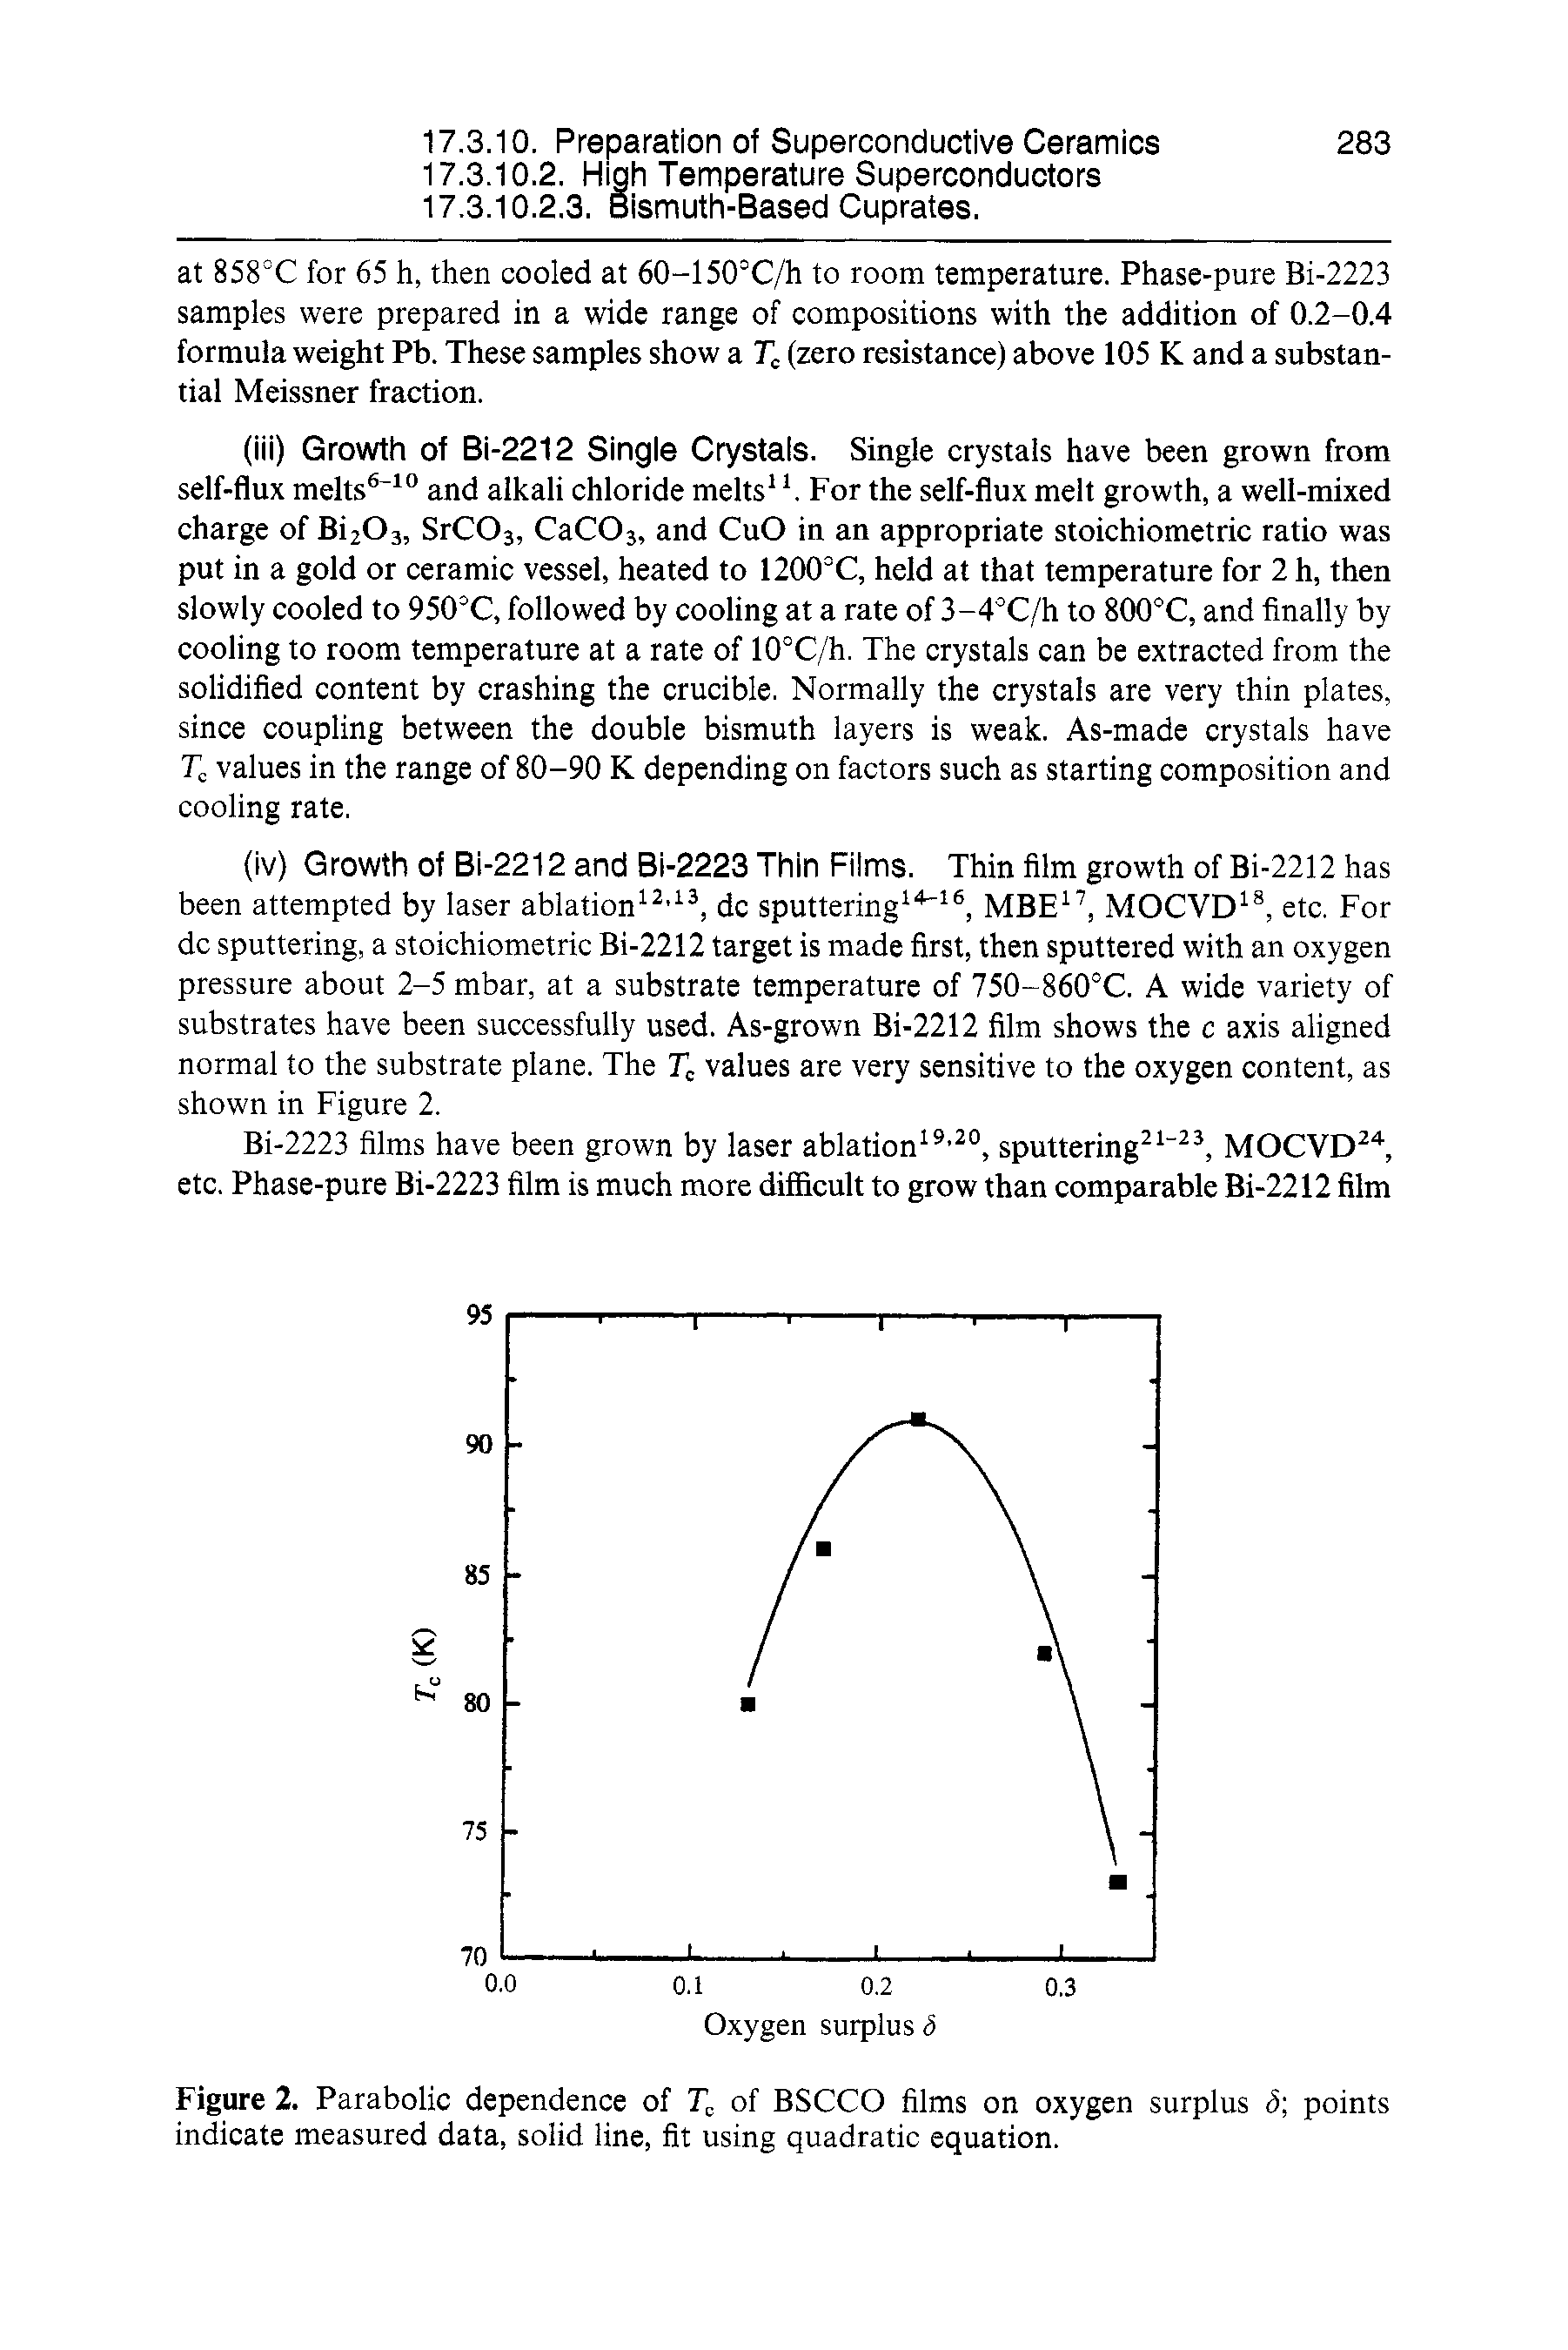 Figure 2. Parabolic dependence of of BSCCO films on oxygen surplus i5 points indicate measured data, solid line, fit using quadratic equation.